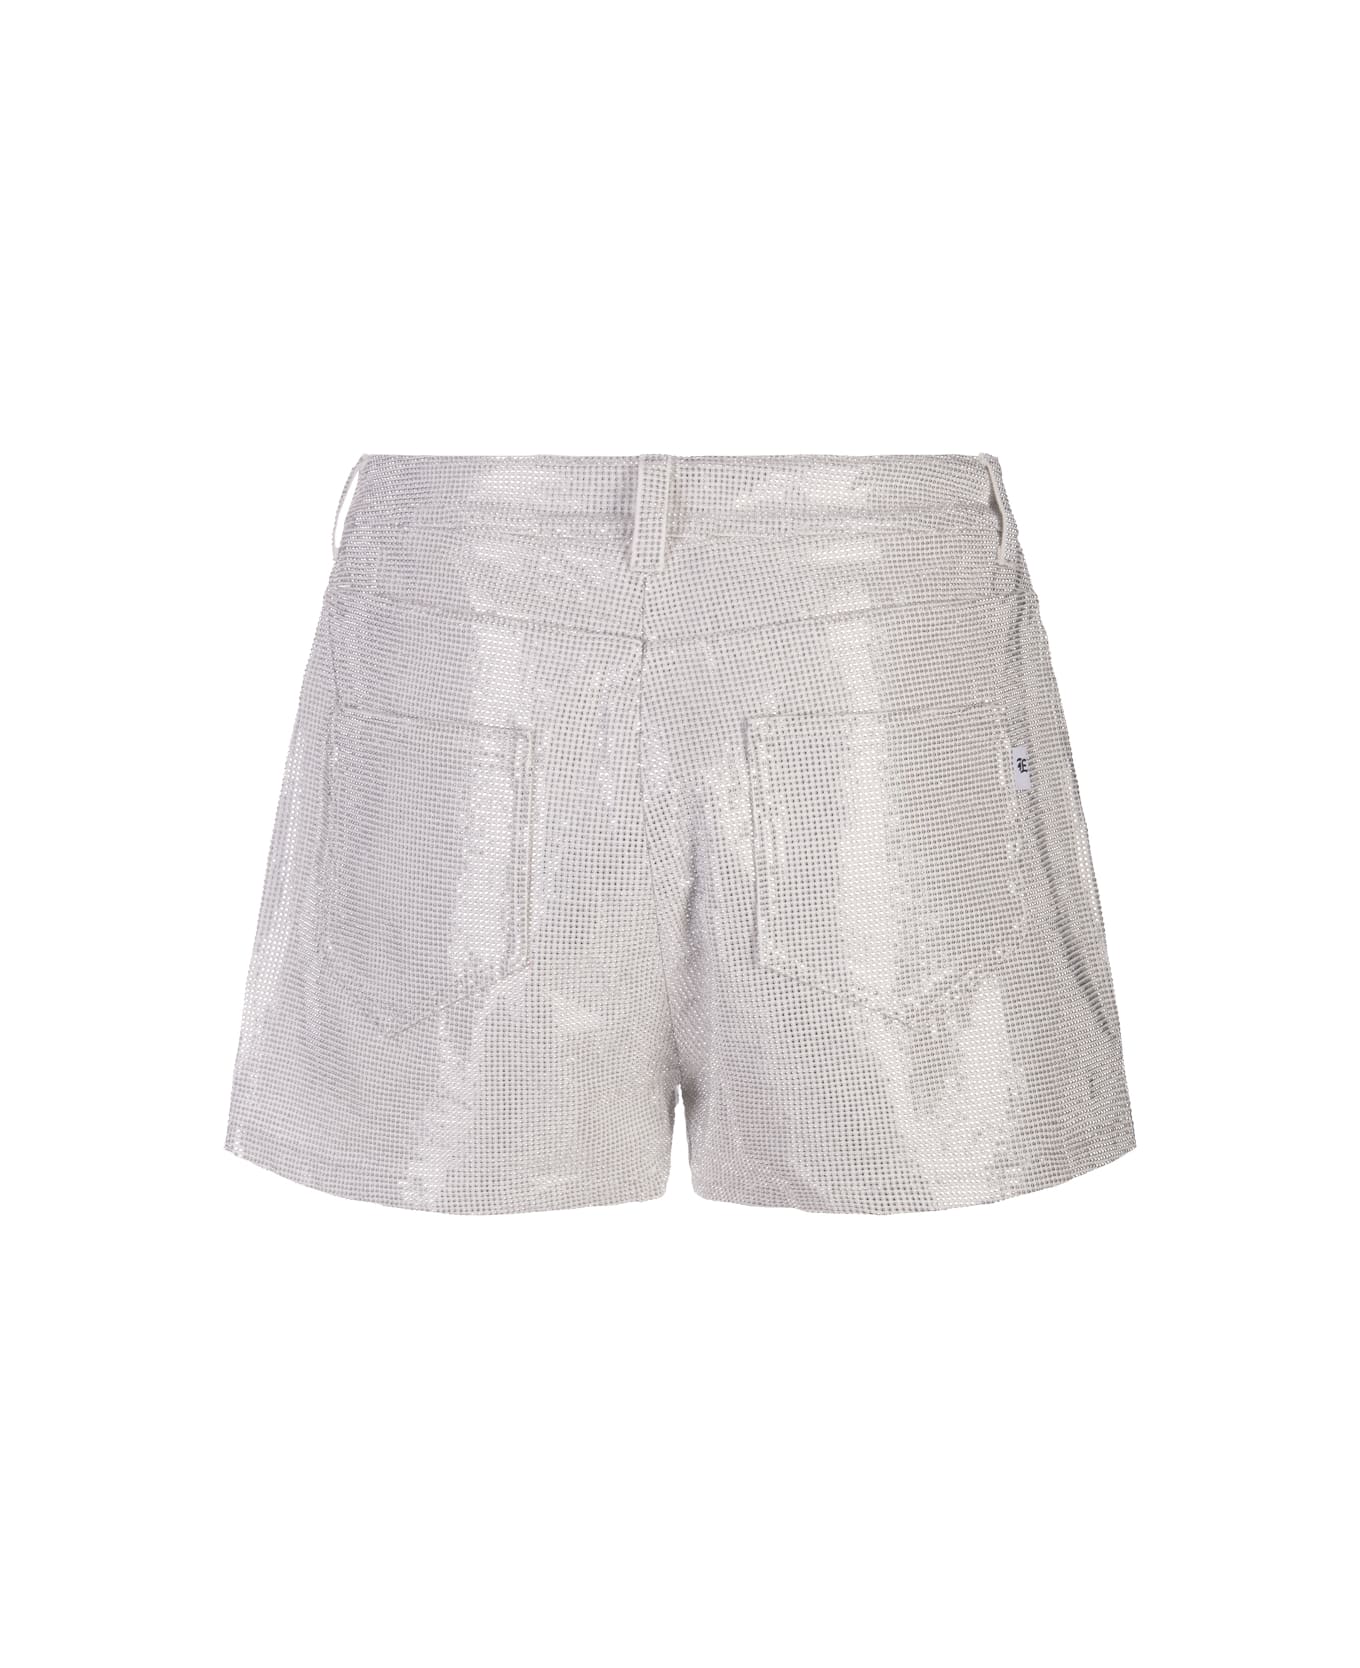 Ermanno Scervino Shorts With Crystals - Silver